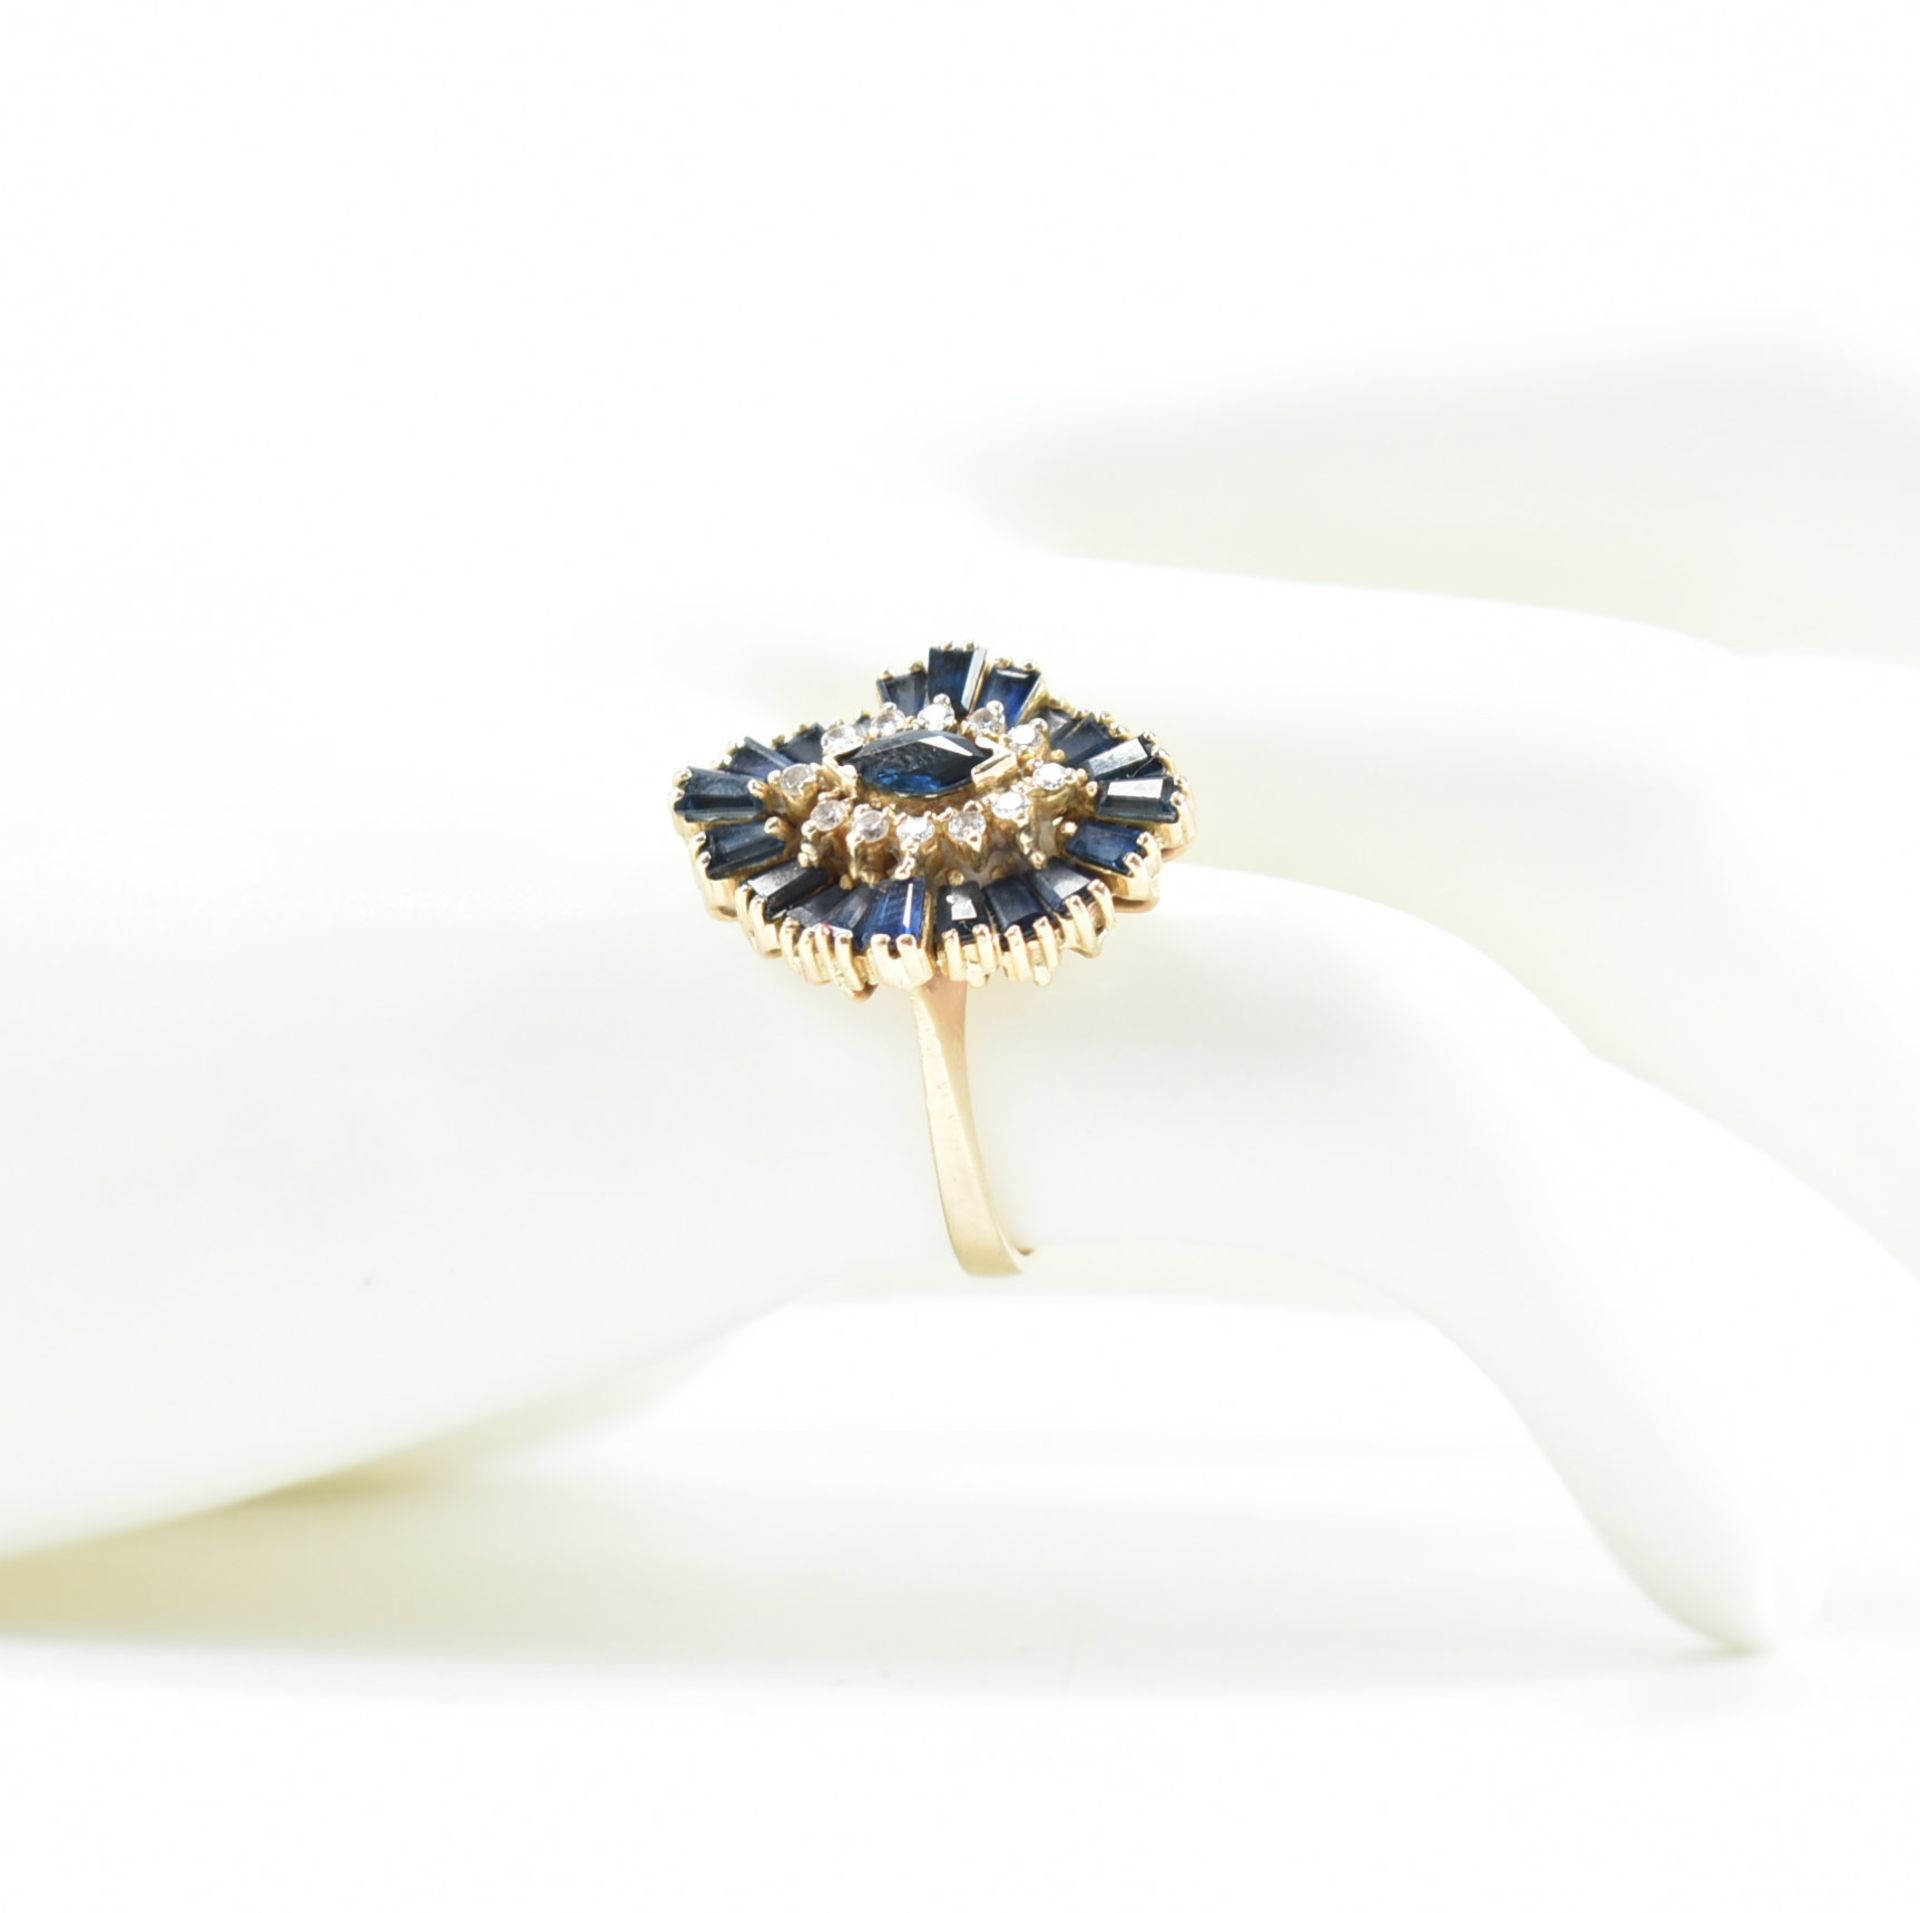 GOLD SPINEL & DIAMOND CLUSTER DRESS RING - Image 7 of 7